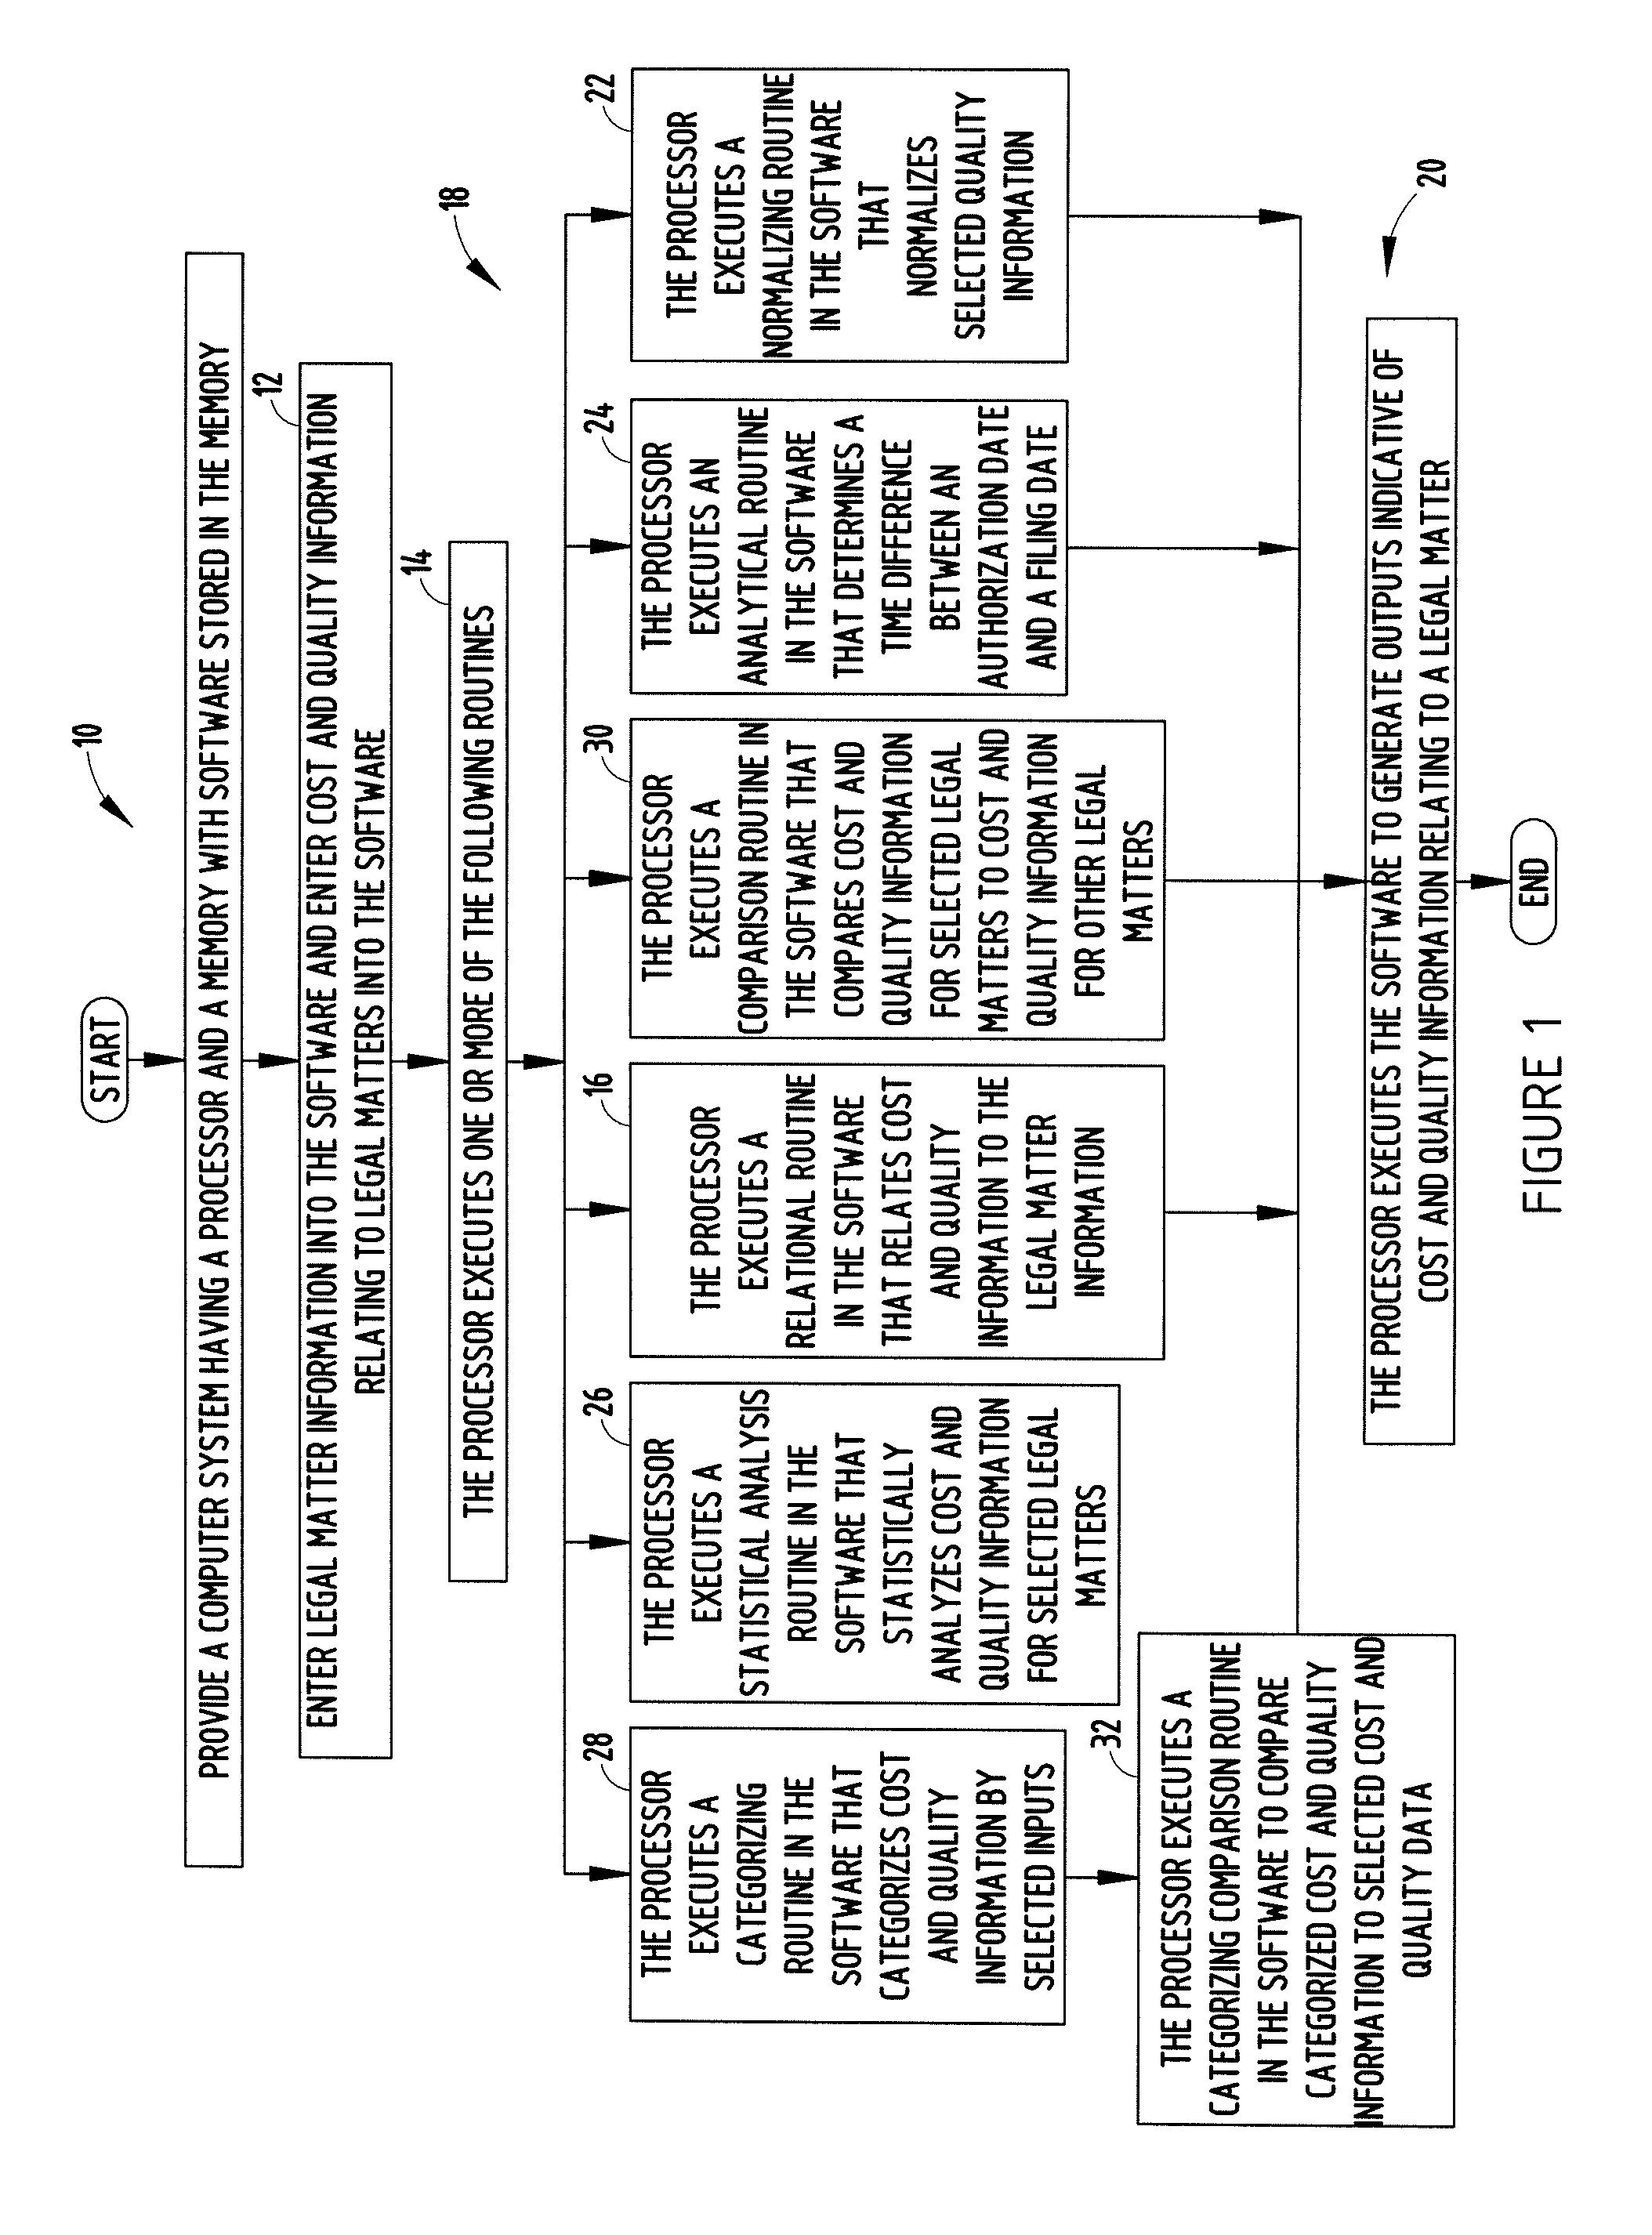 System and method for managing legal service providers